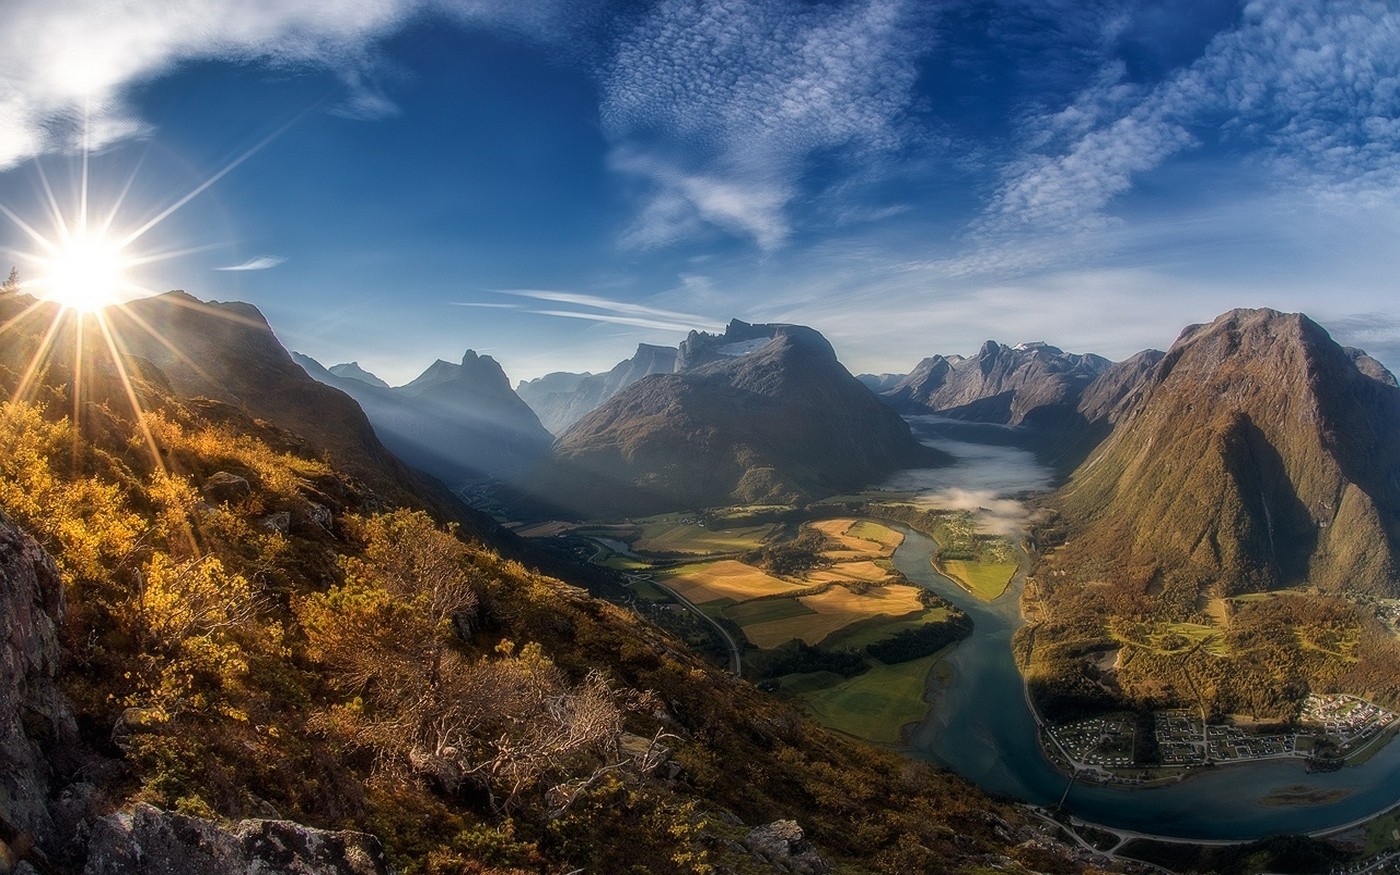 General 1400x875 landscape nature sun rays morning shrubs mountains river clouds town road mist summer Norway field nordic landscapes